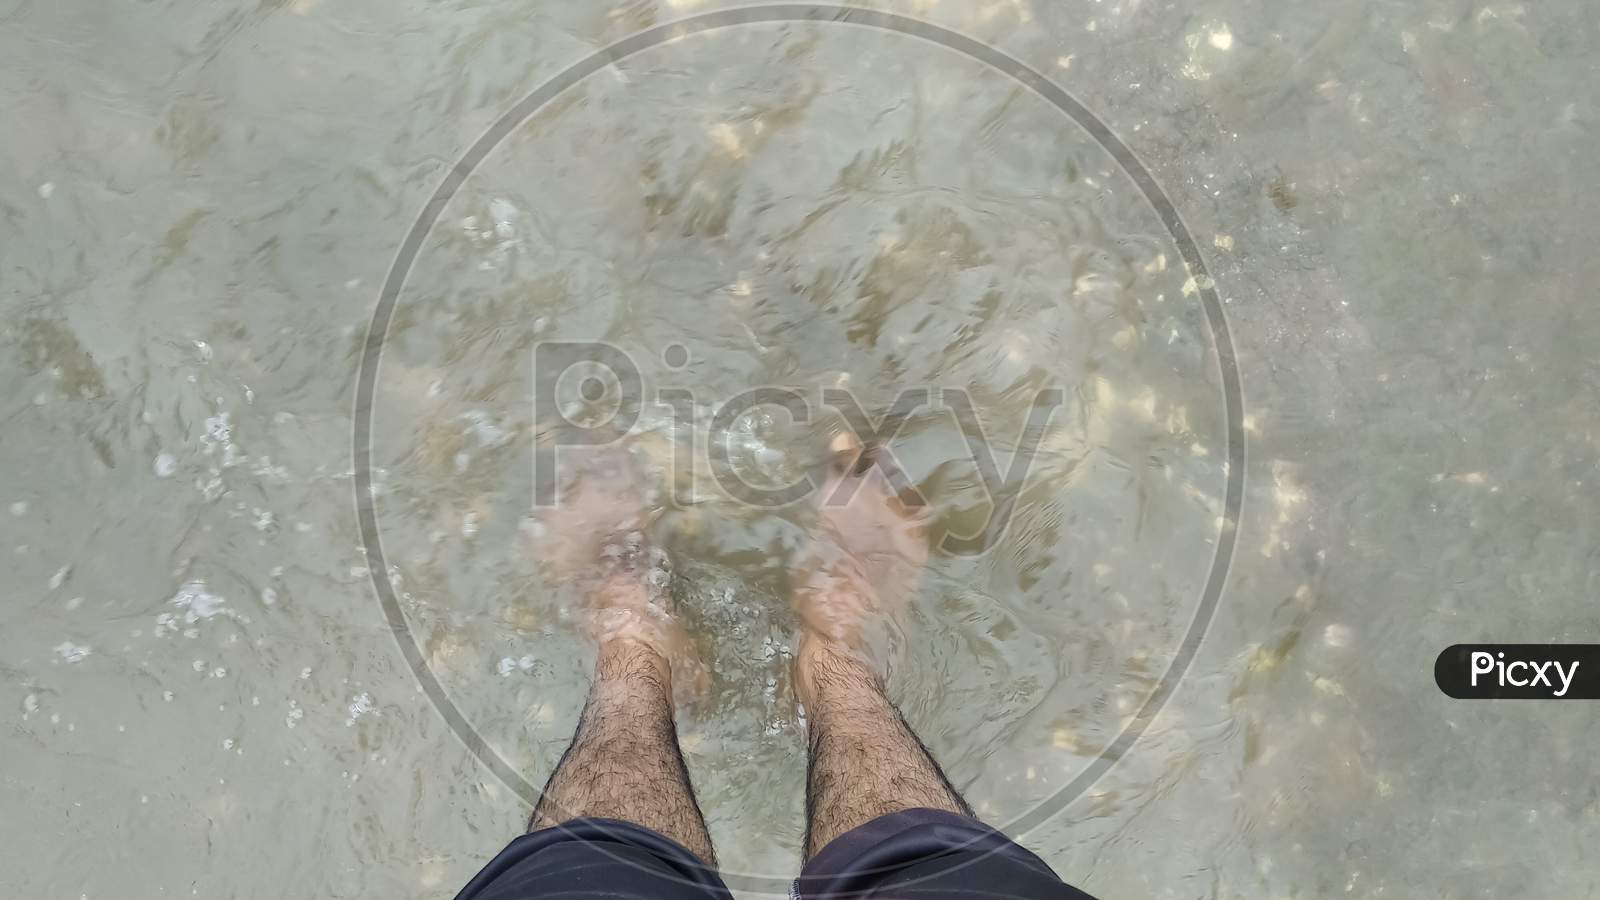 24 august 2020 india; A man is standing in the river's water enjoying the cold water